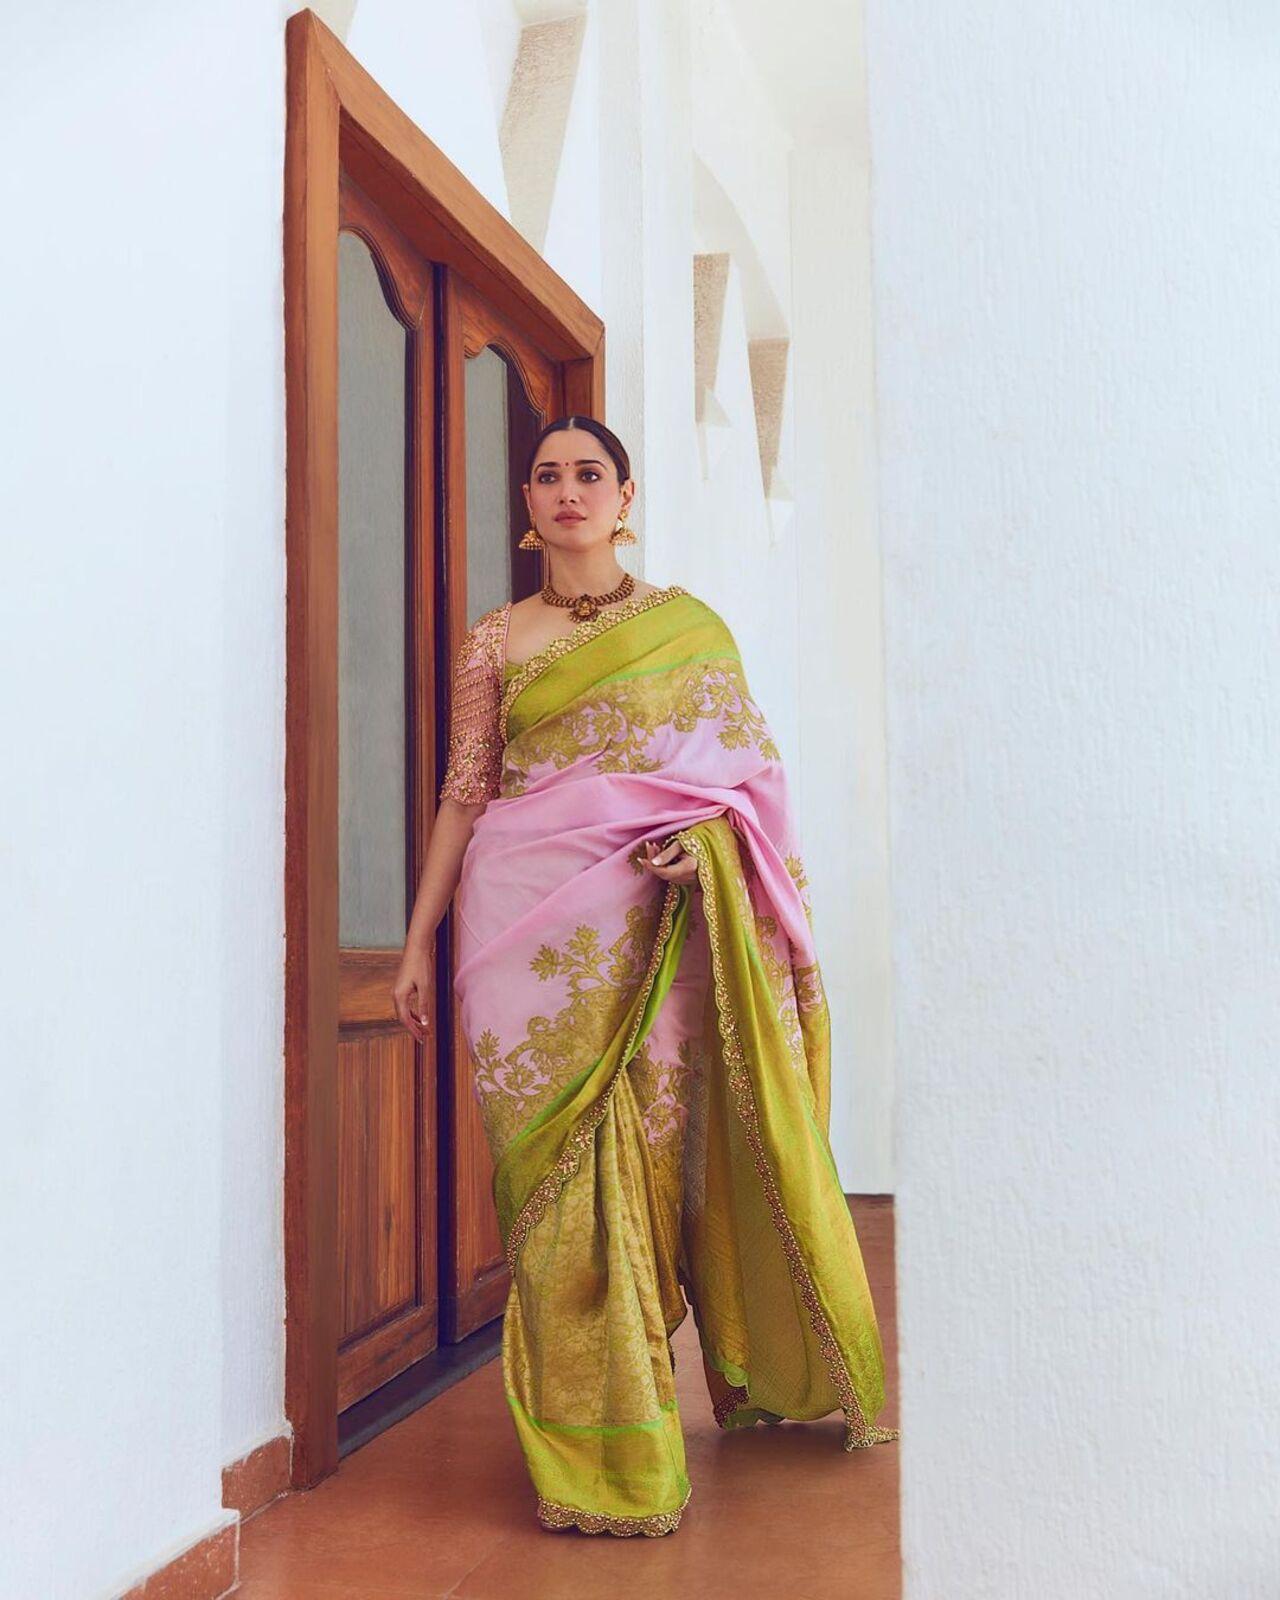 Play with colours this festive season. Tamannaah Bhatia's pink and green saree is a perfect combo to stand out as you celebrate with your loved ones